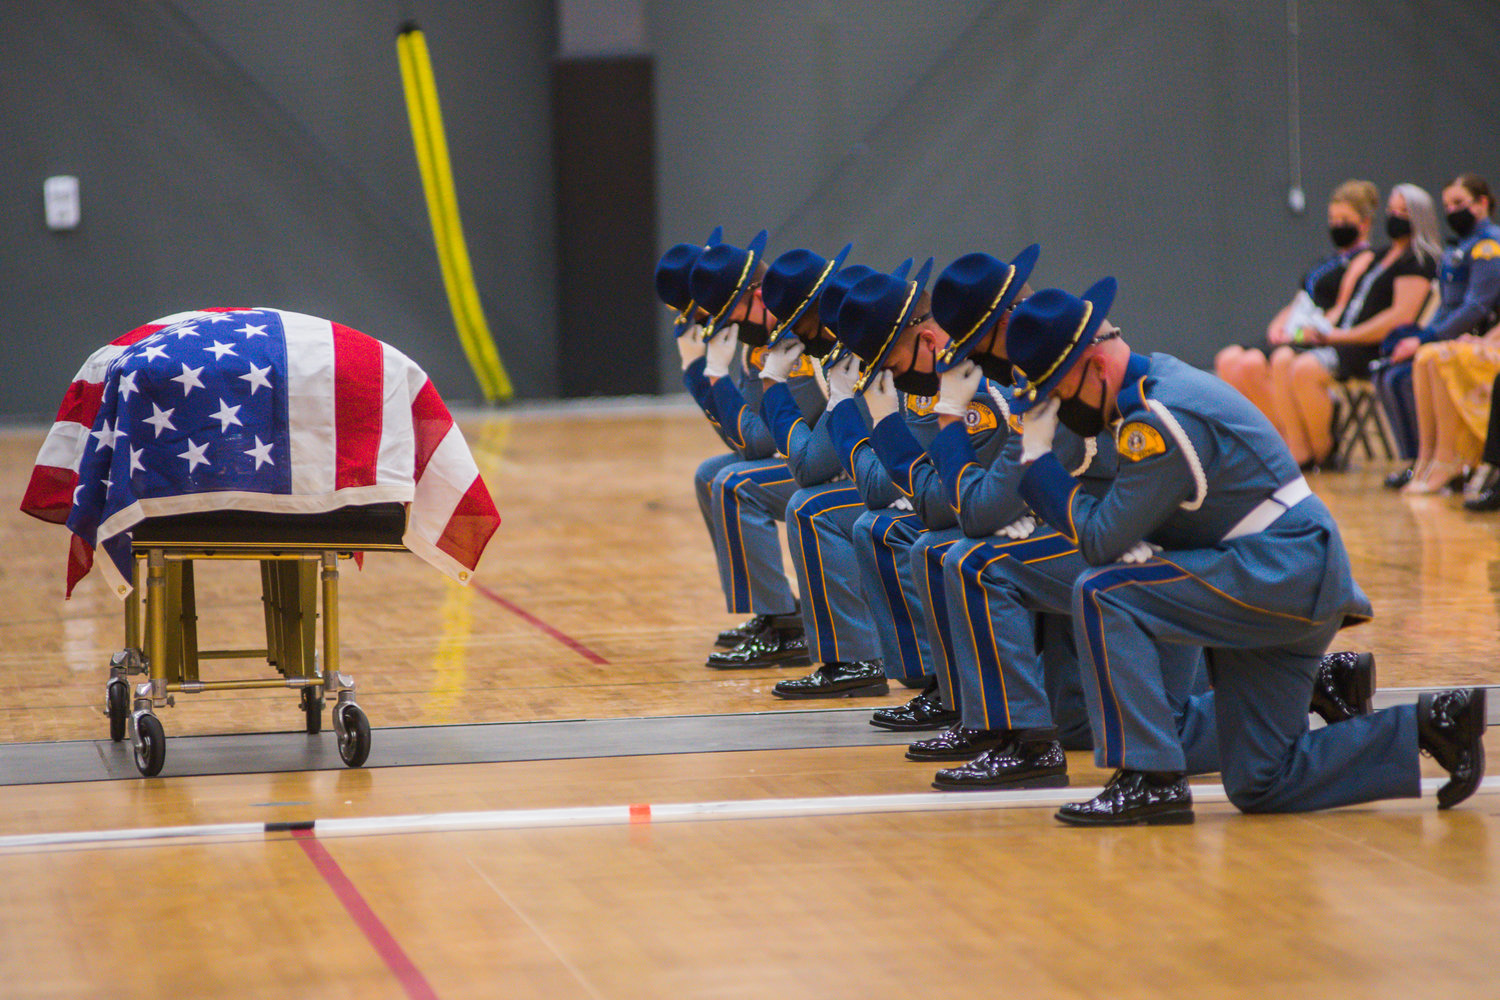 Members of the Washington State Patrol kneel at the casket of Justin R. Schaffer during a service to honor his life Wednesday afternoon in Centralia.